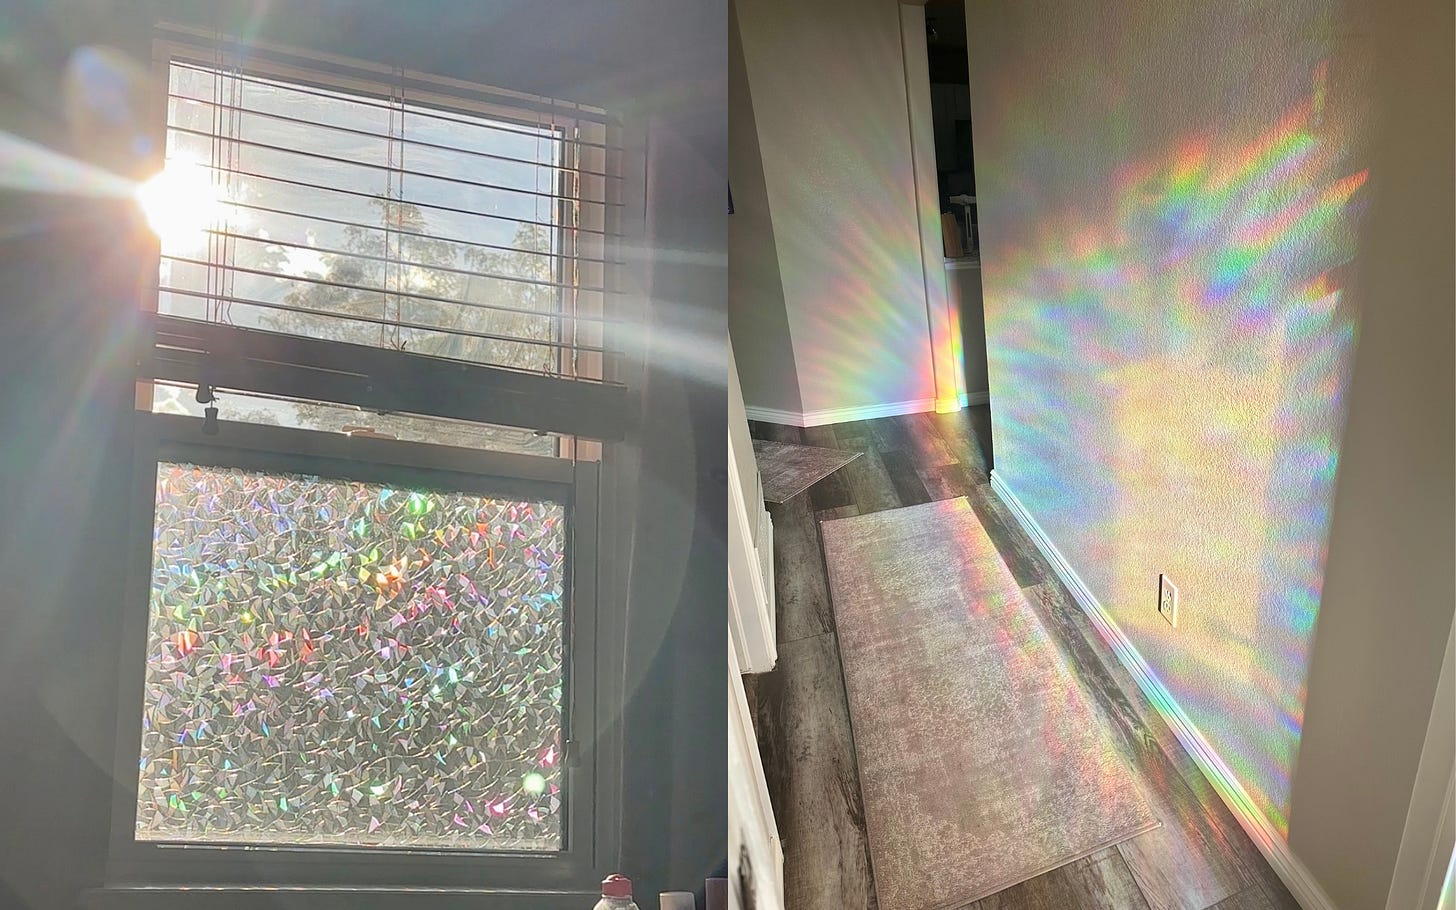 Two photos side by side where the first photo depicts a clear stained glass-like window film that looks rainbowy and the second depicts rainbows of light displayed on a wall and floor